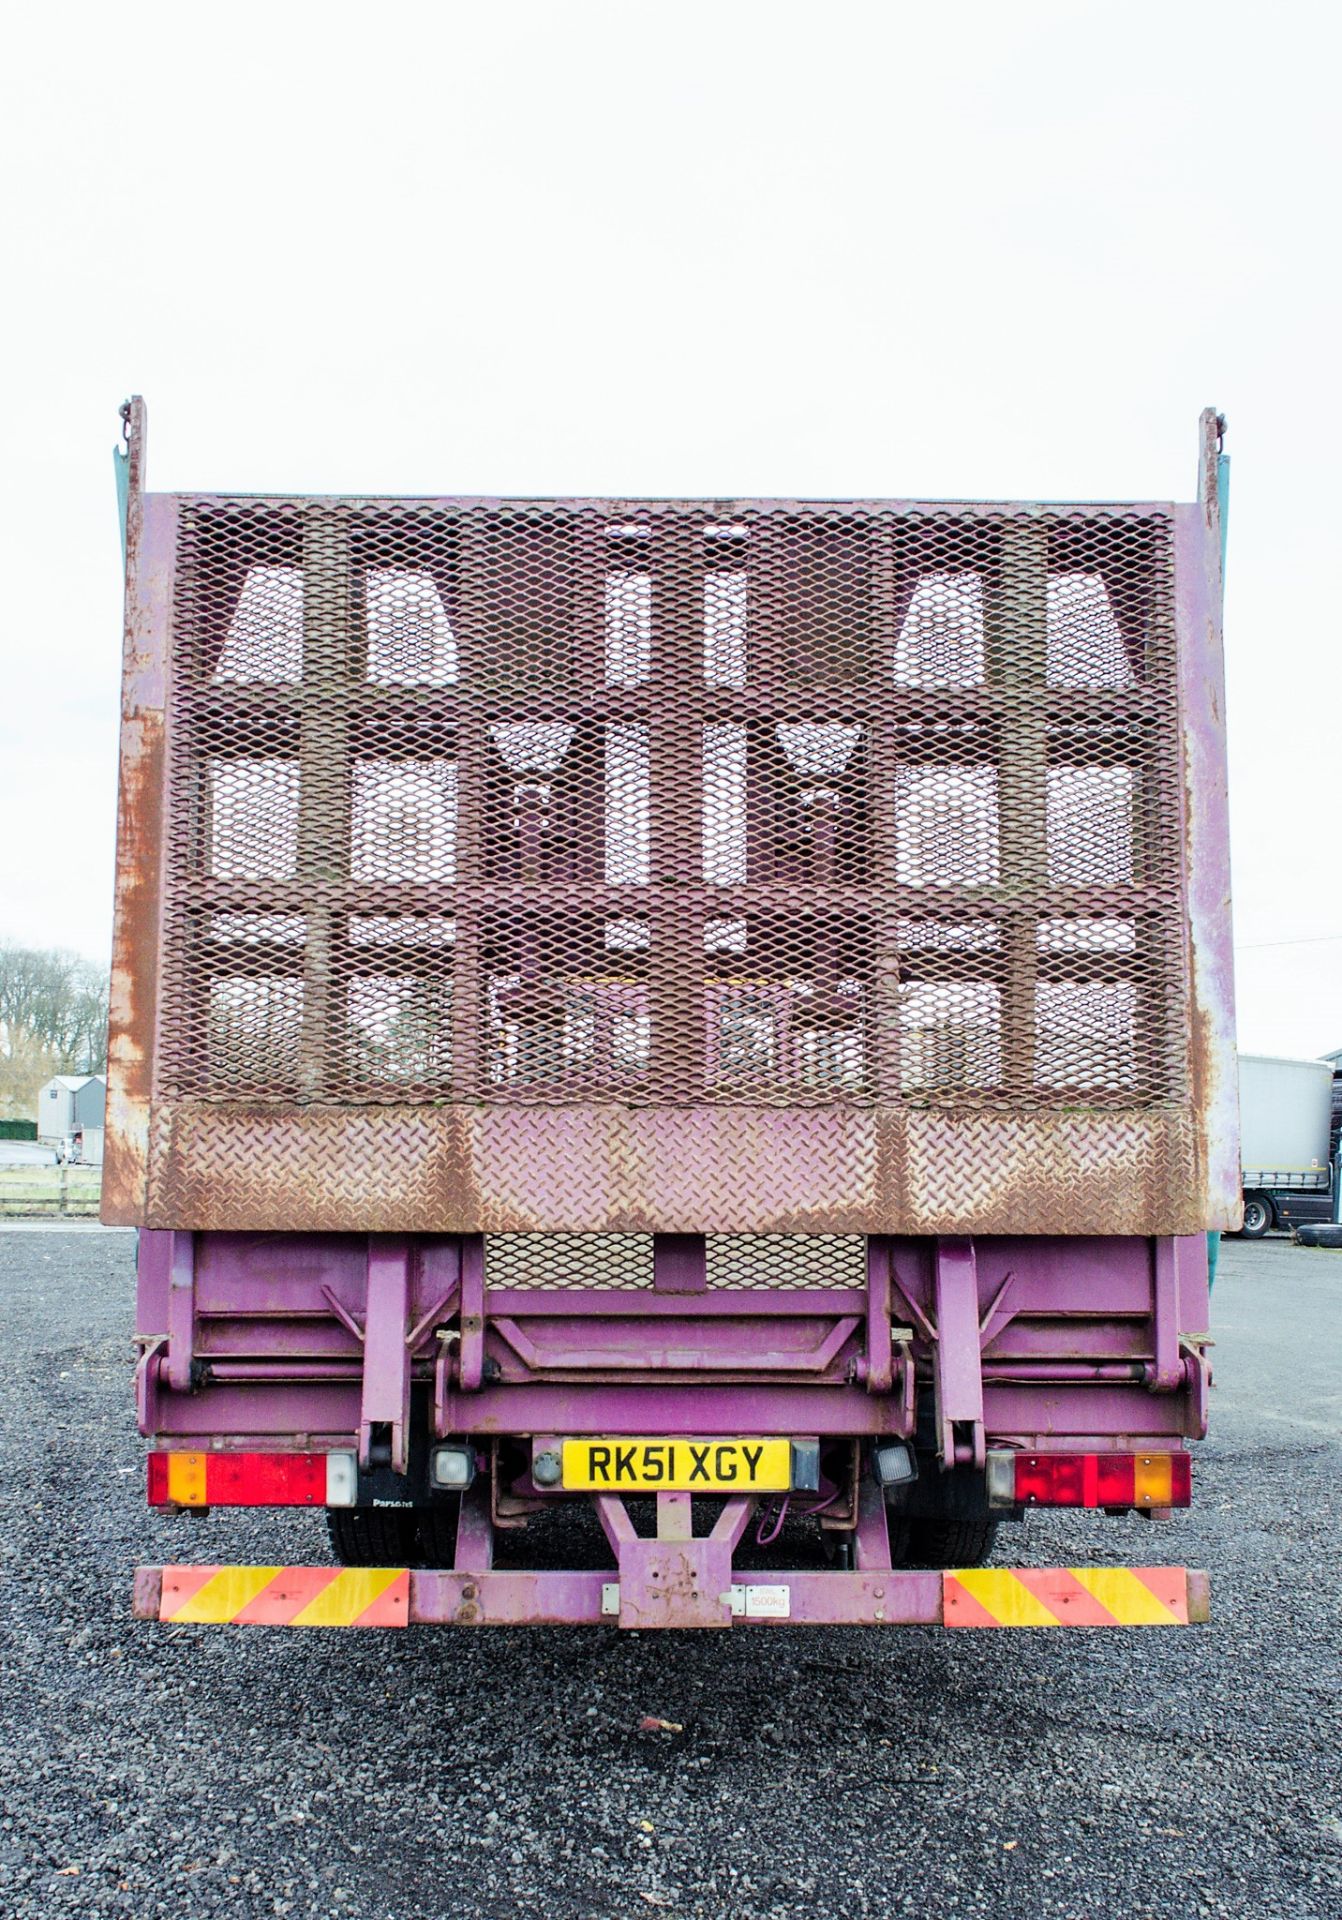 Iveco 180E21 Cargo 18 tonne beaver tail plant lorry Registration Number: RK51 XGY Date of - Image 6 of 19